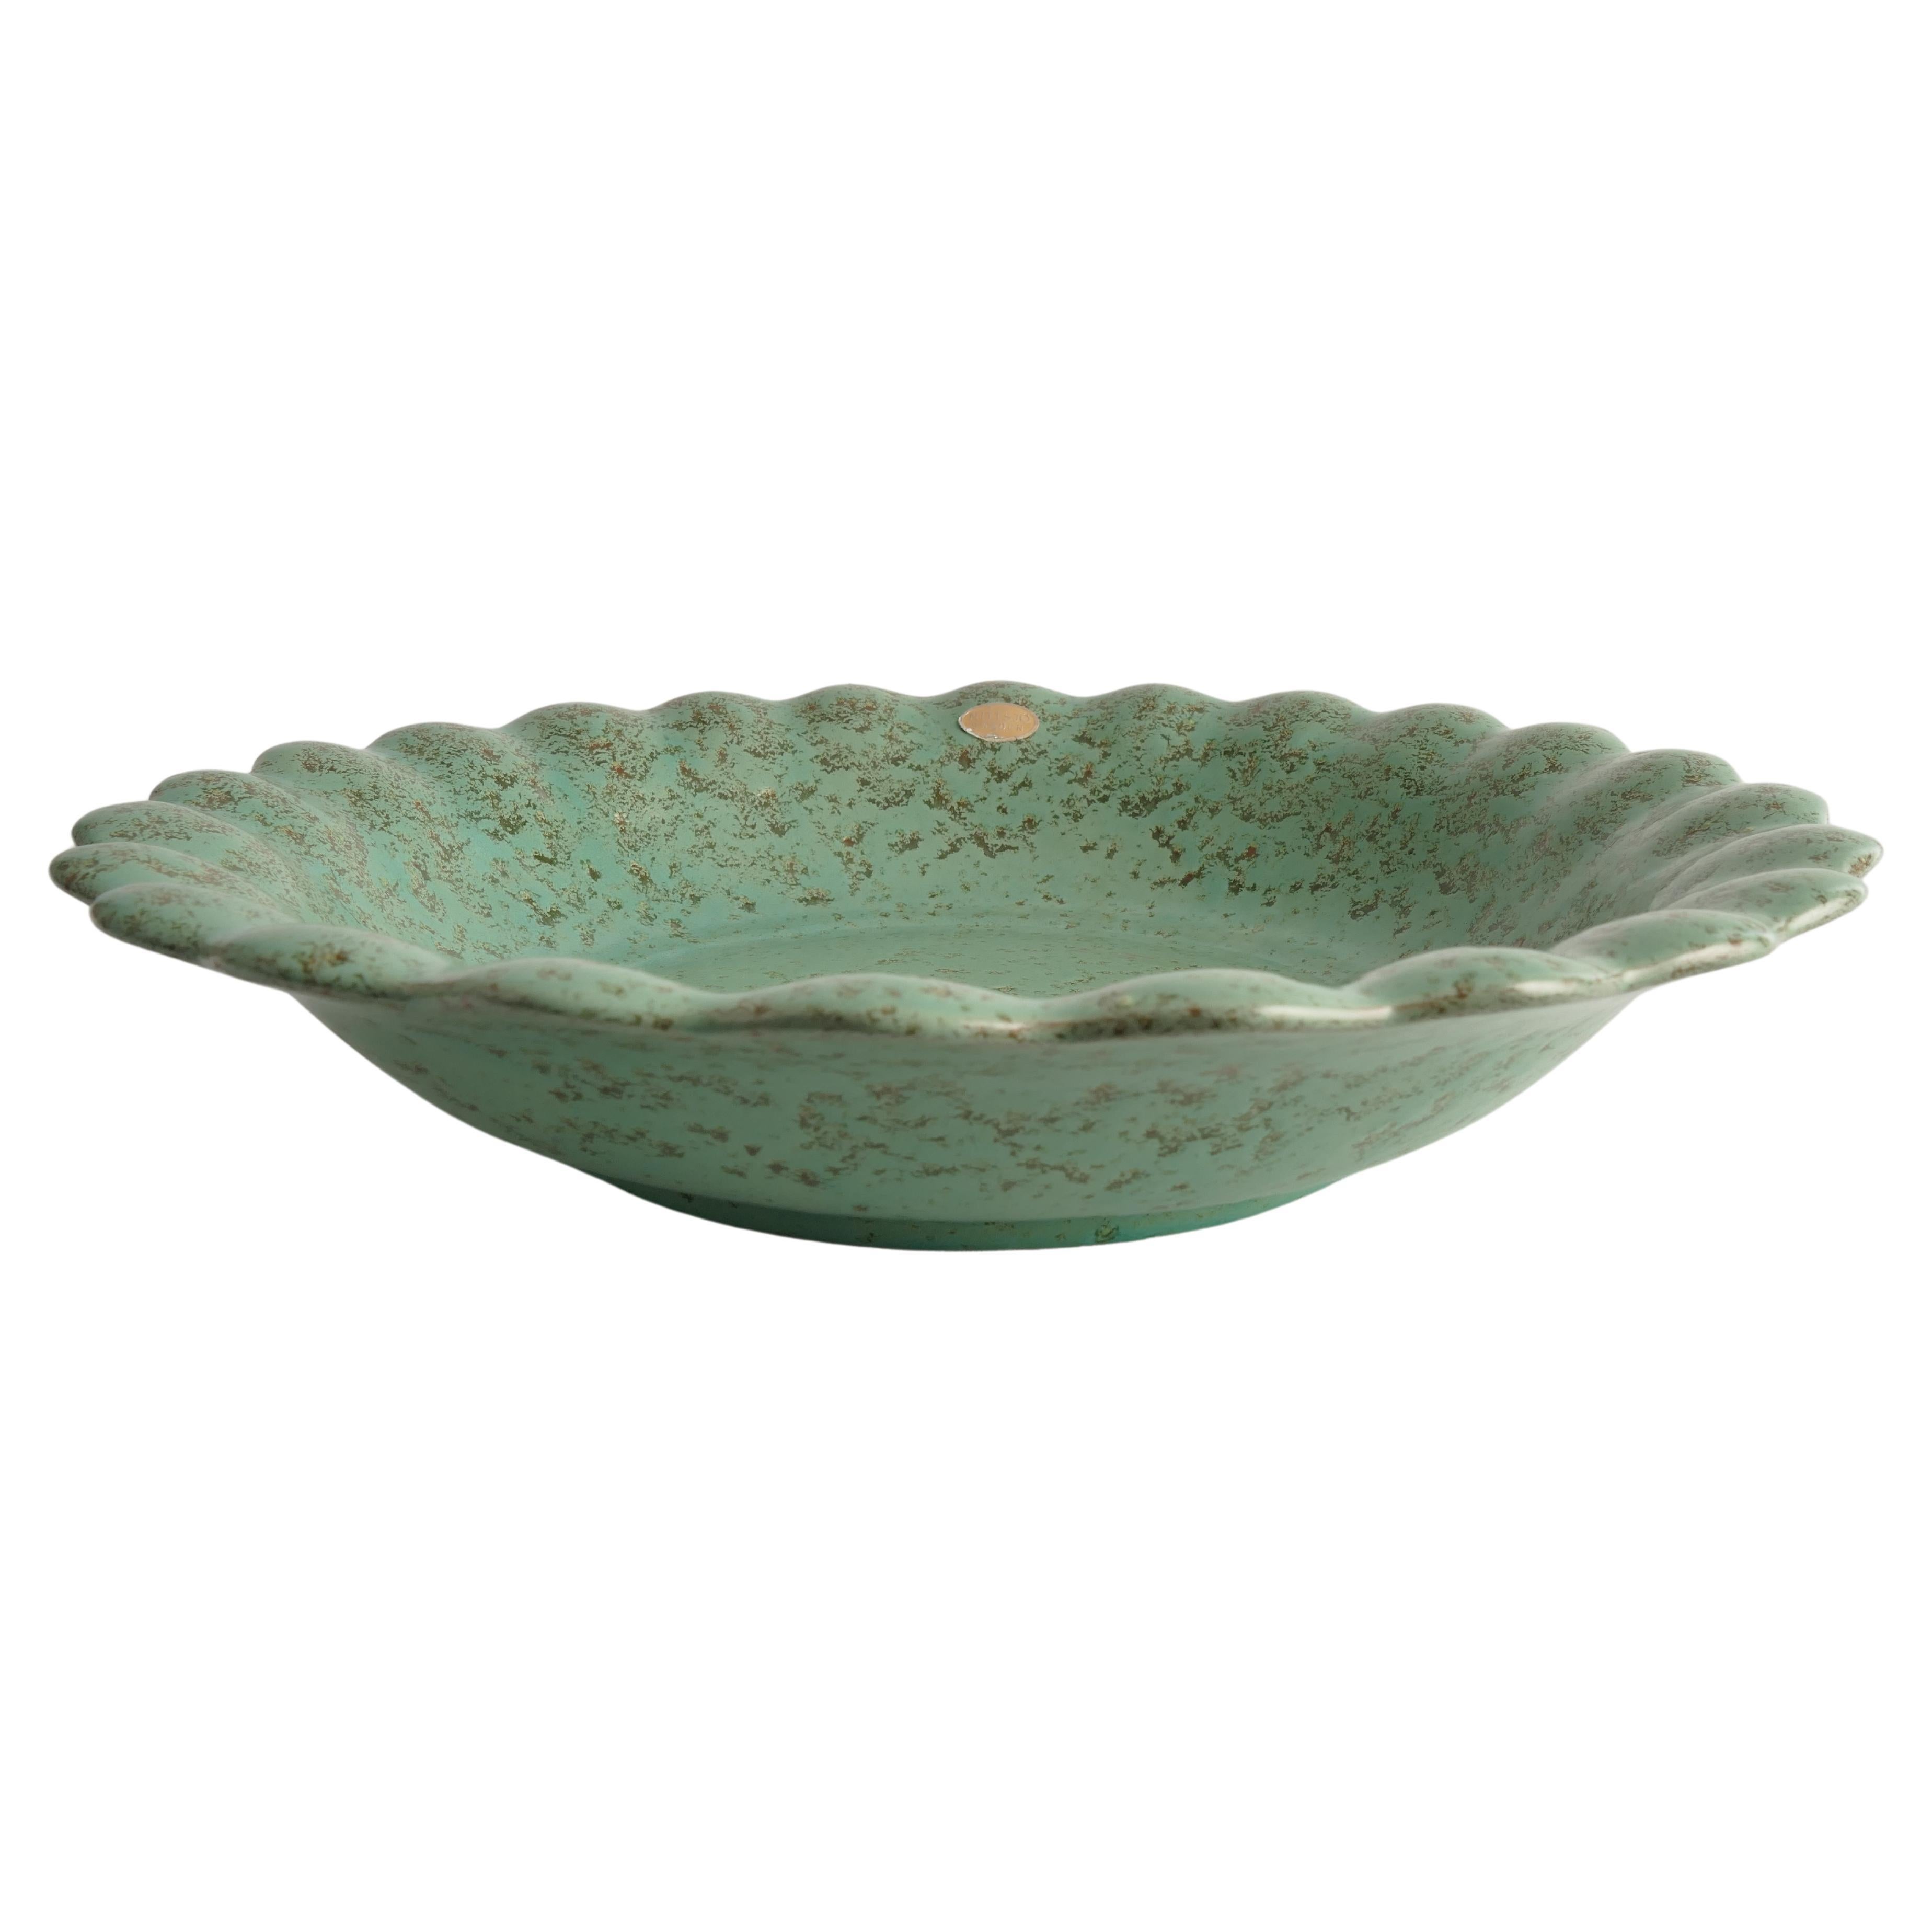 This collection comprises an elegant ensemble from Nittsjö, featuring exquisite celadon green dishes with a classic structure. Each element, from the grandeur of the large bowl to the delicate plates, reflects the meticulous craftsmanship that has